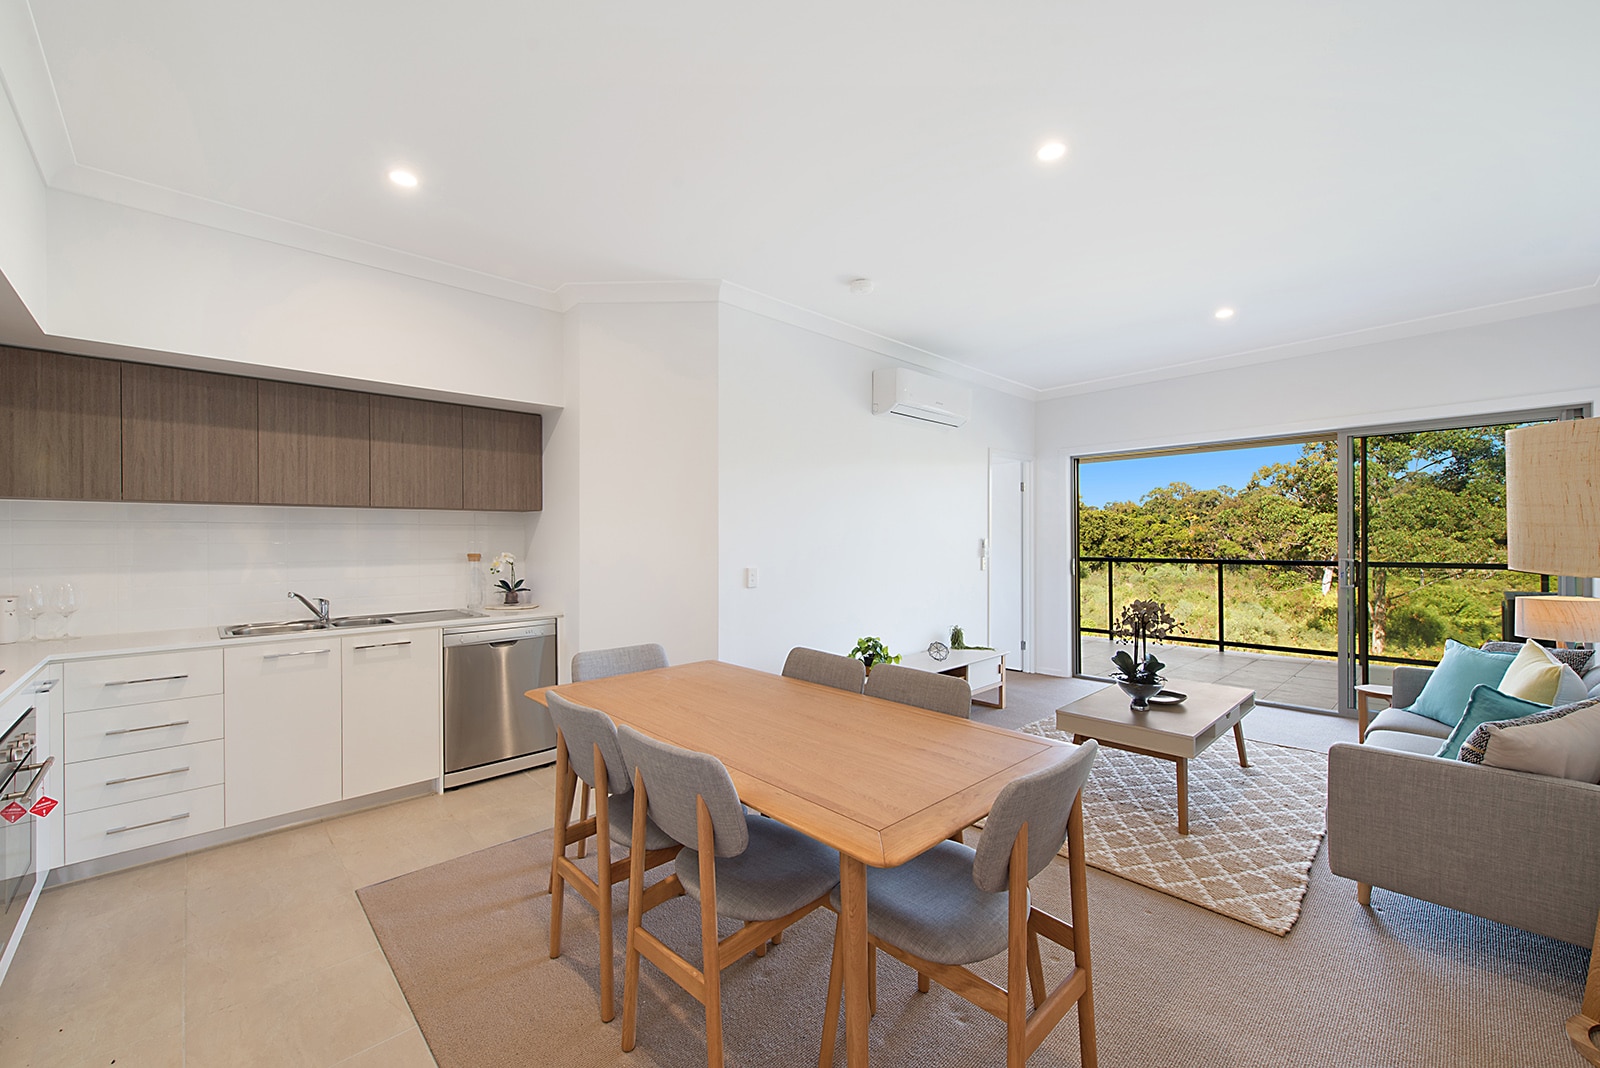 Houghton st BRAND NEW 2 BEDROOM LUXURY Petrie APARTMENTS